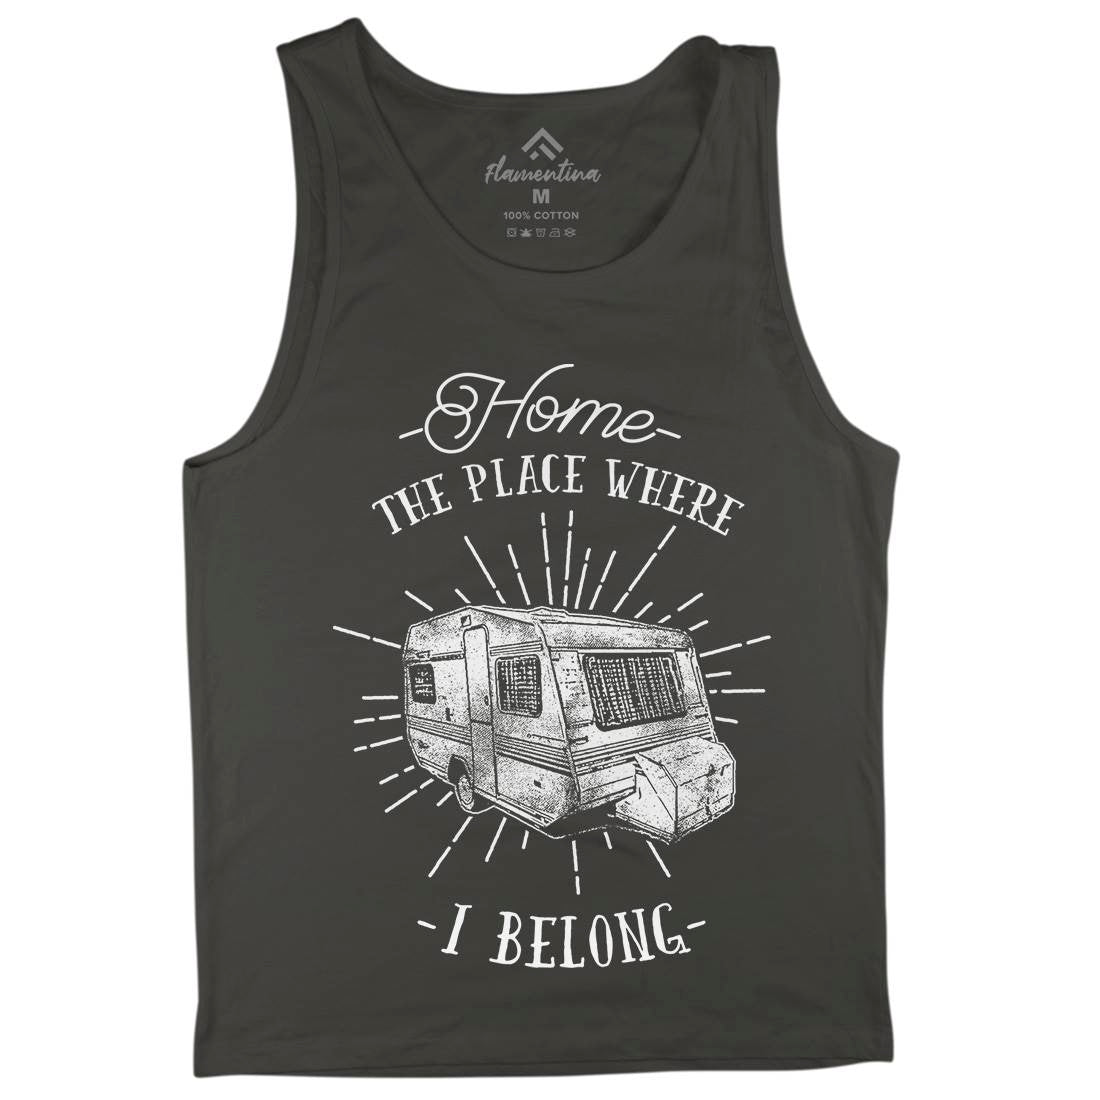 Home The Place Where I Belong Mens Tank Top Vest Nature C944